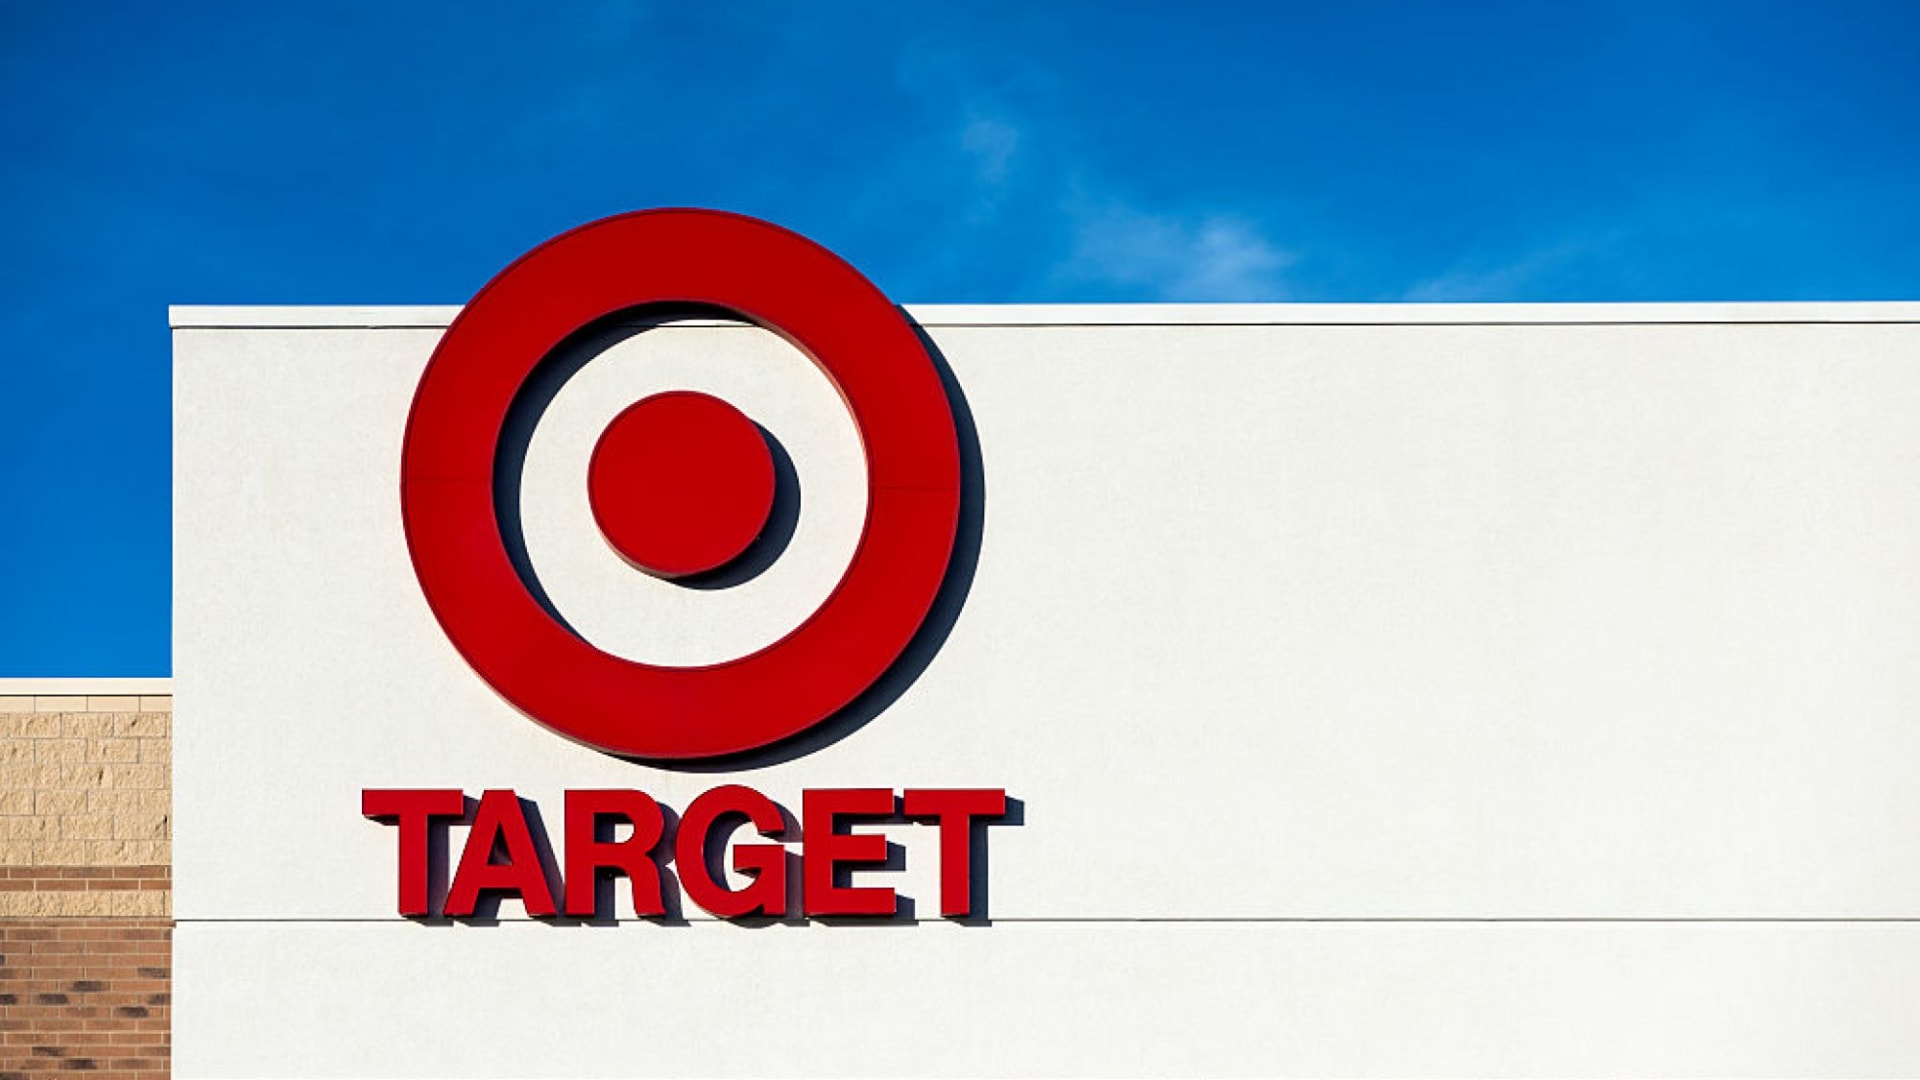 Target Just Made a Big Announcement, and It's the Most Relaxing News I've Heard This Week